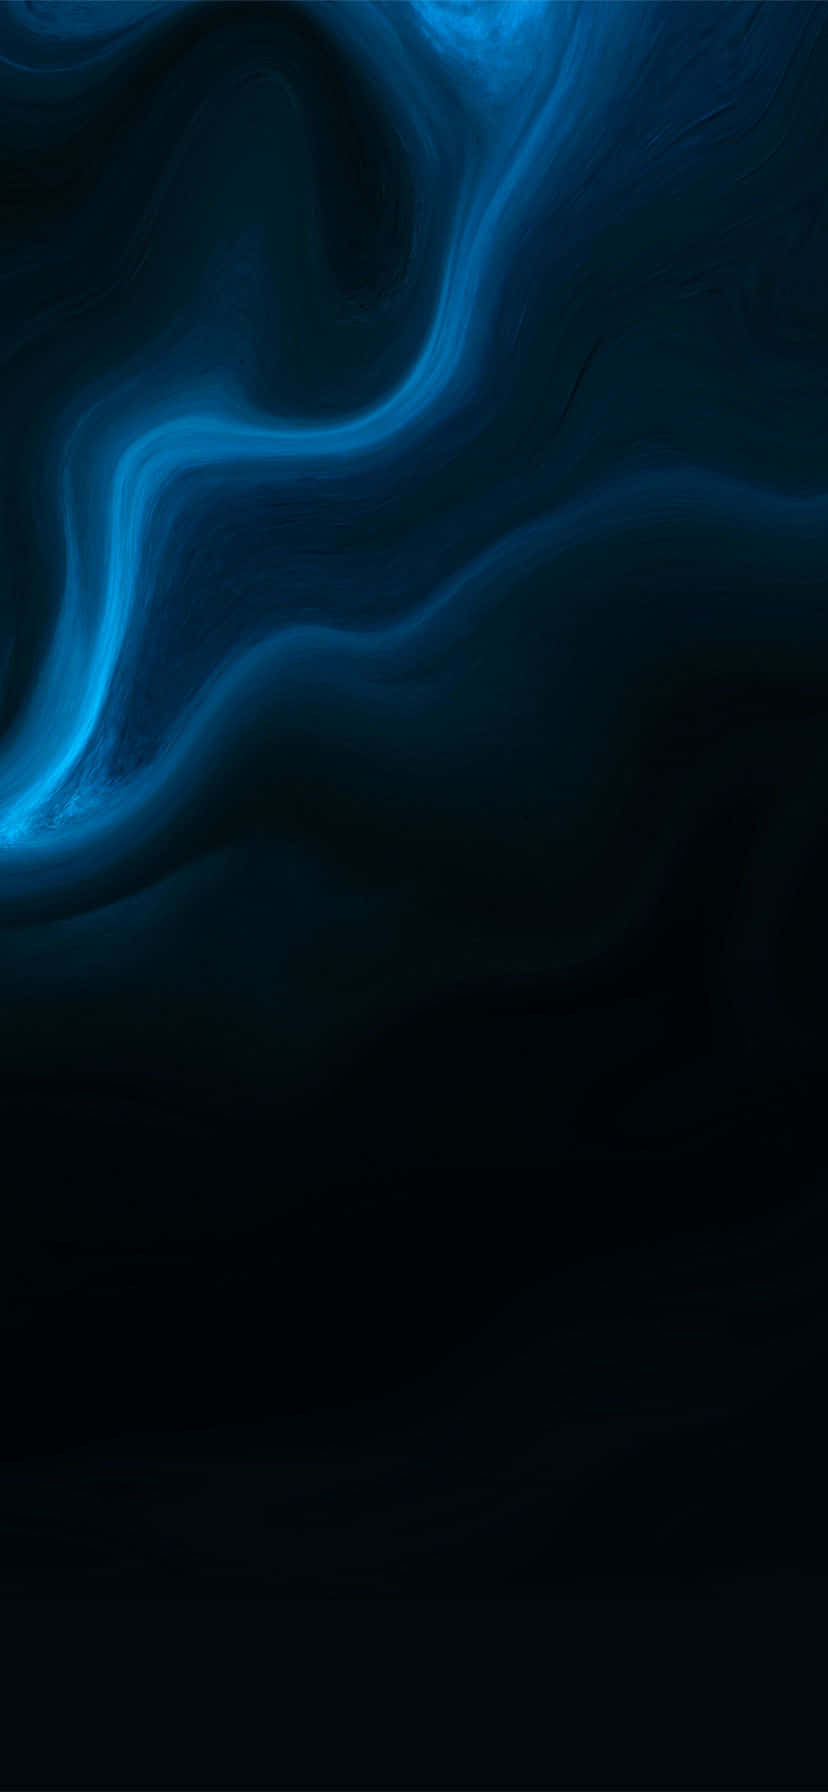 Check out the new high-tech Black and Blue iPhone Wallpaper